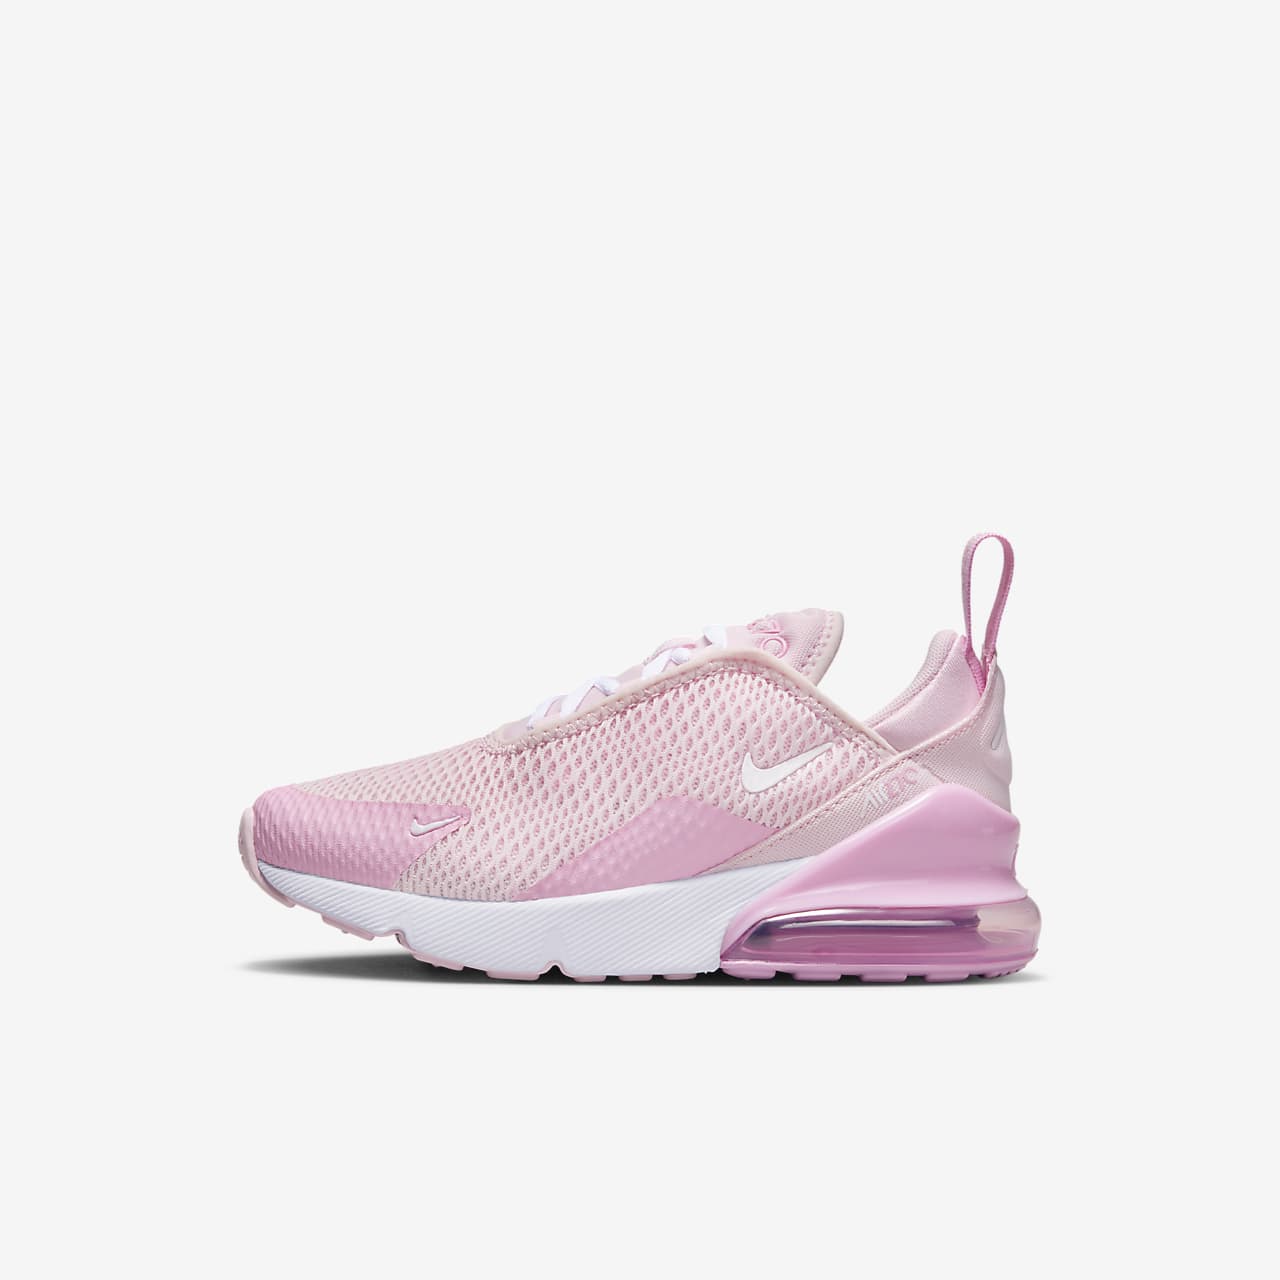 nike air max 270 children's size 1- OFF 